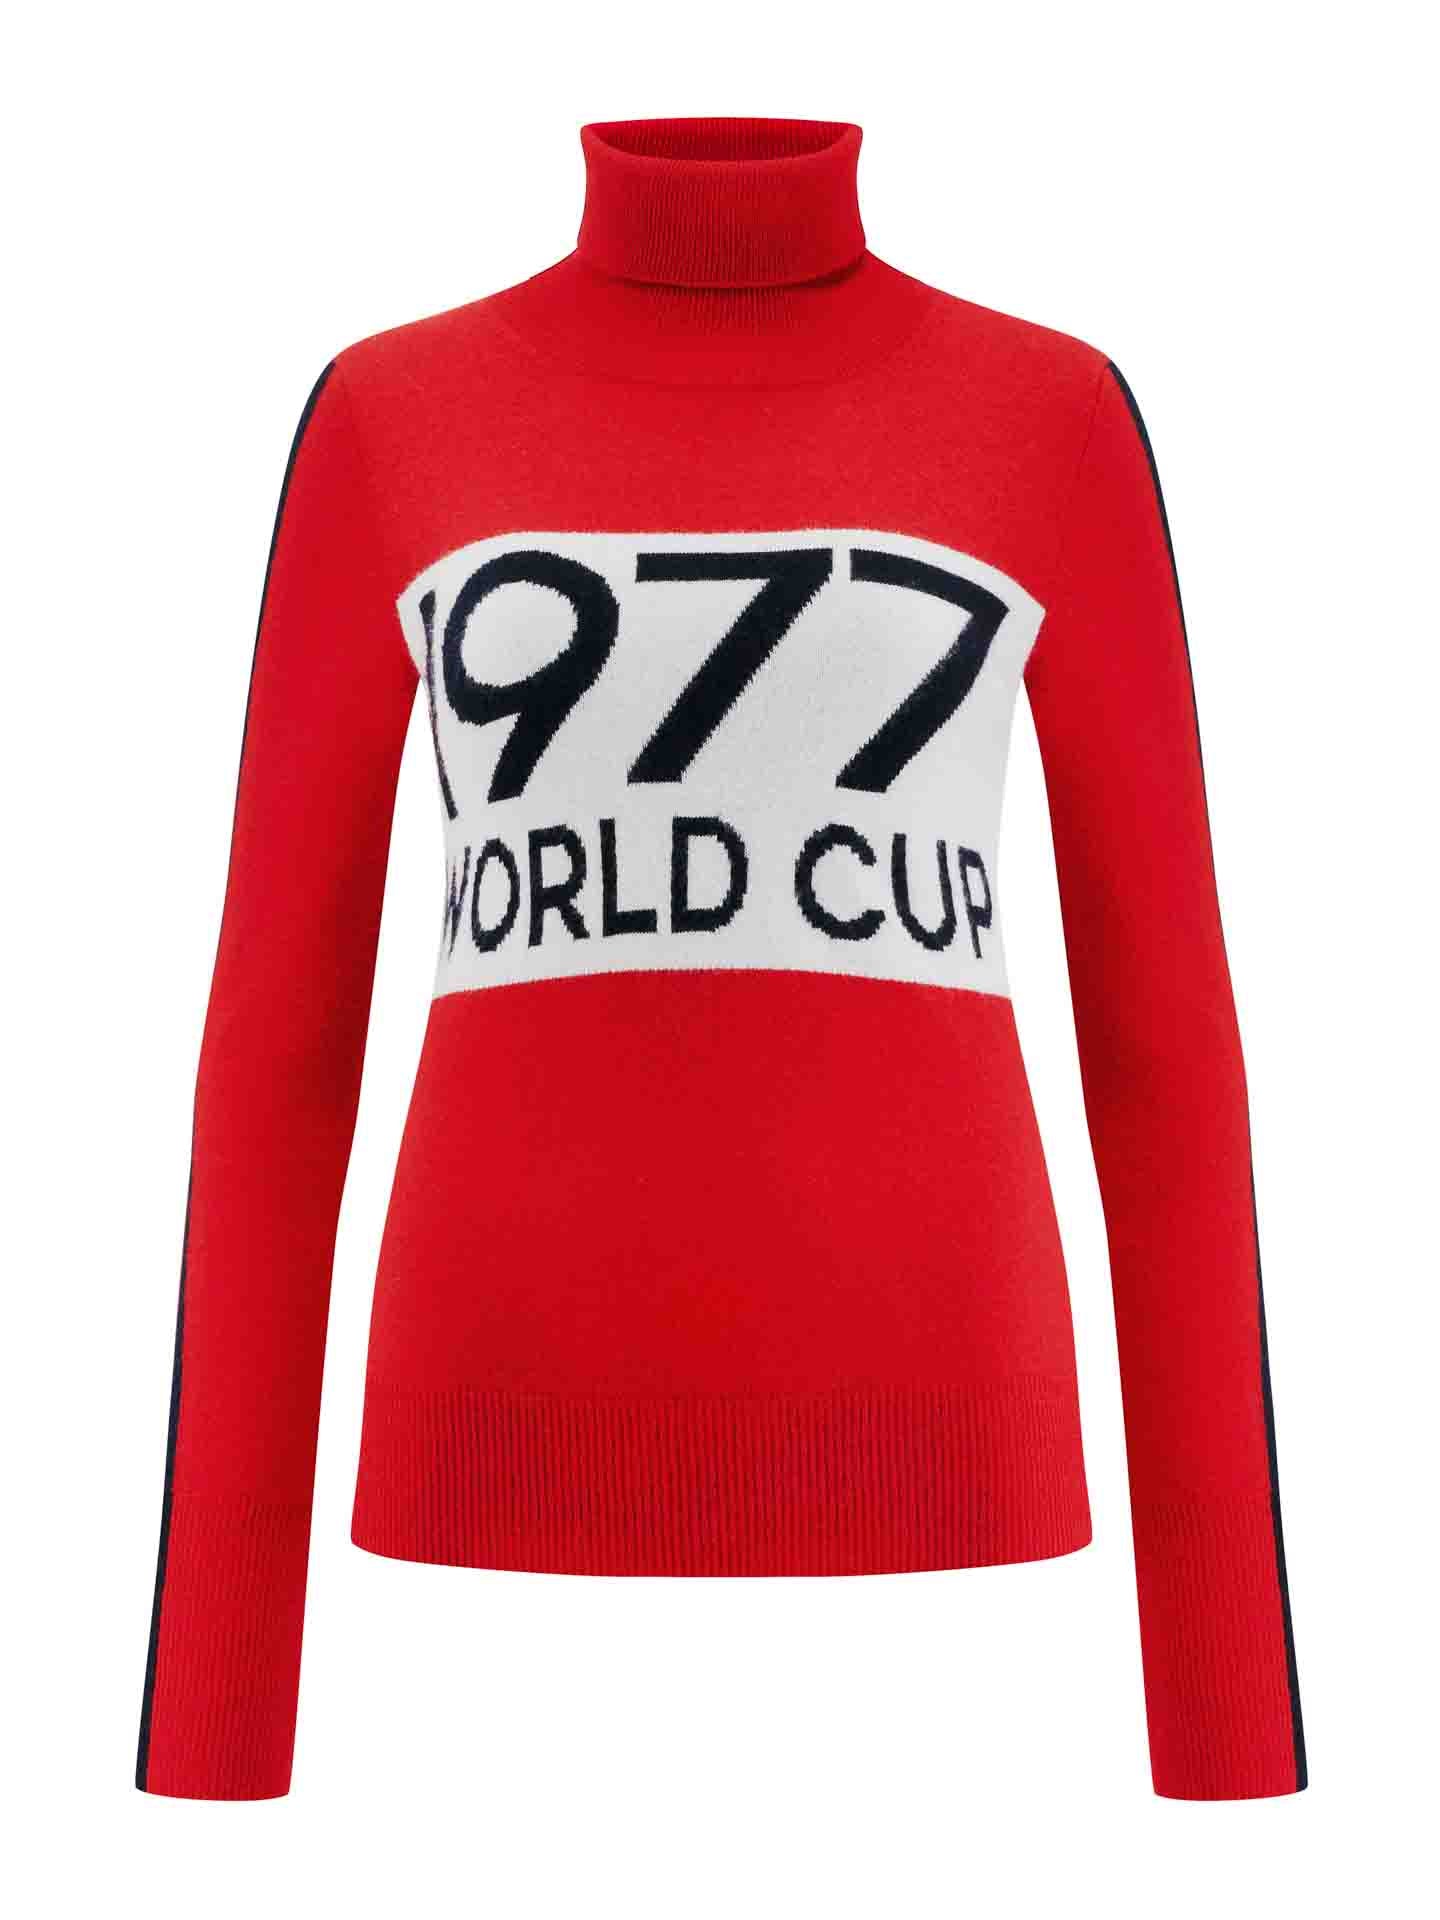 1977 World Cup Sweater Women Red